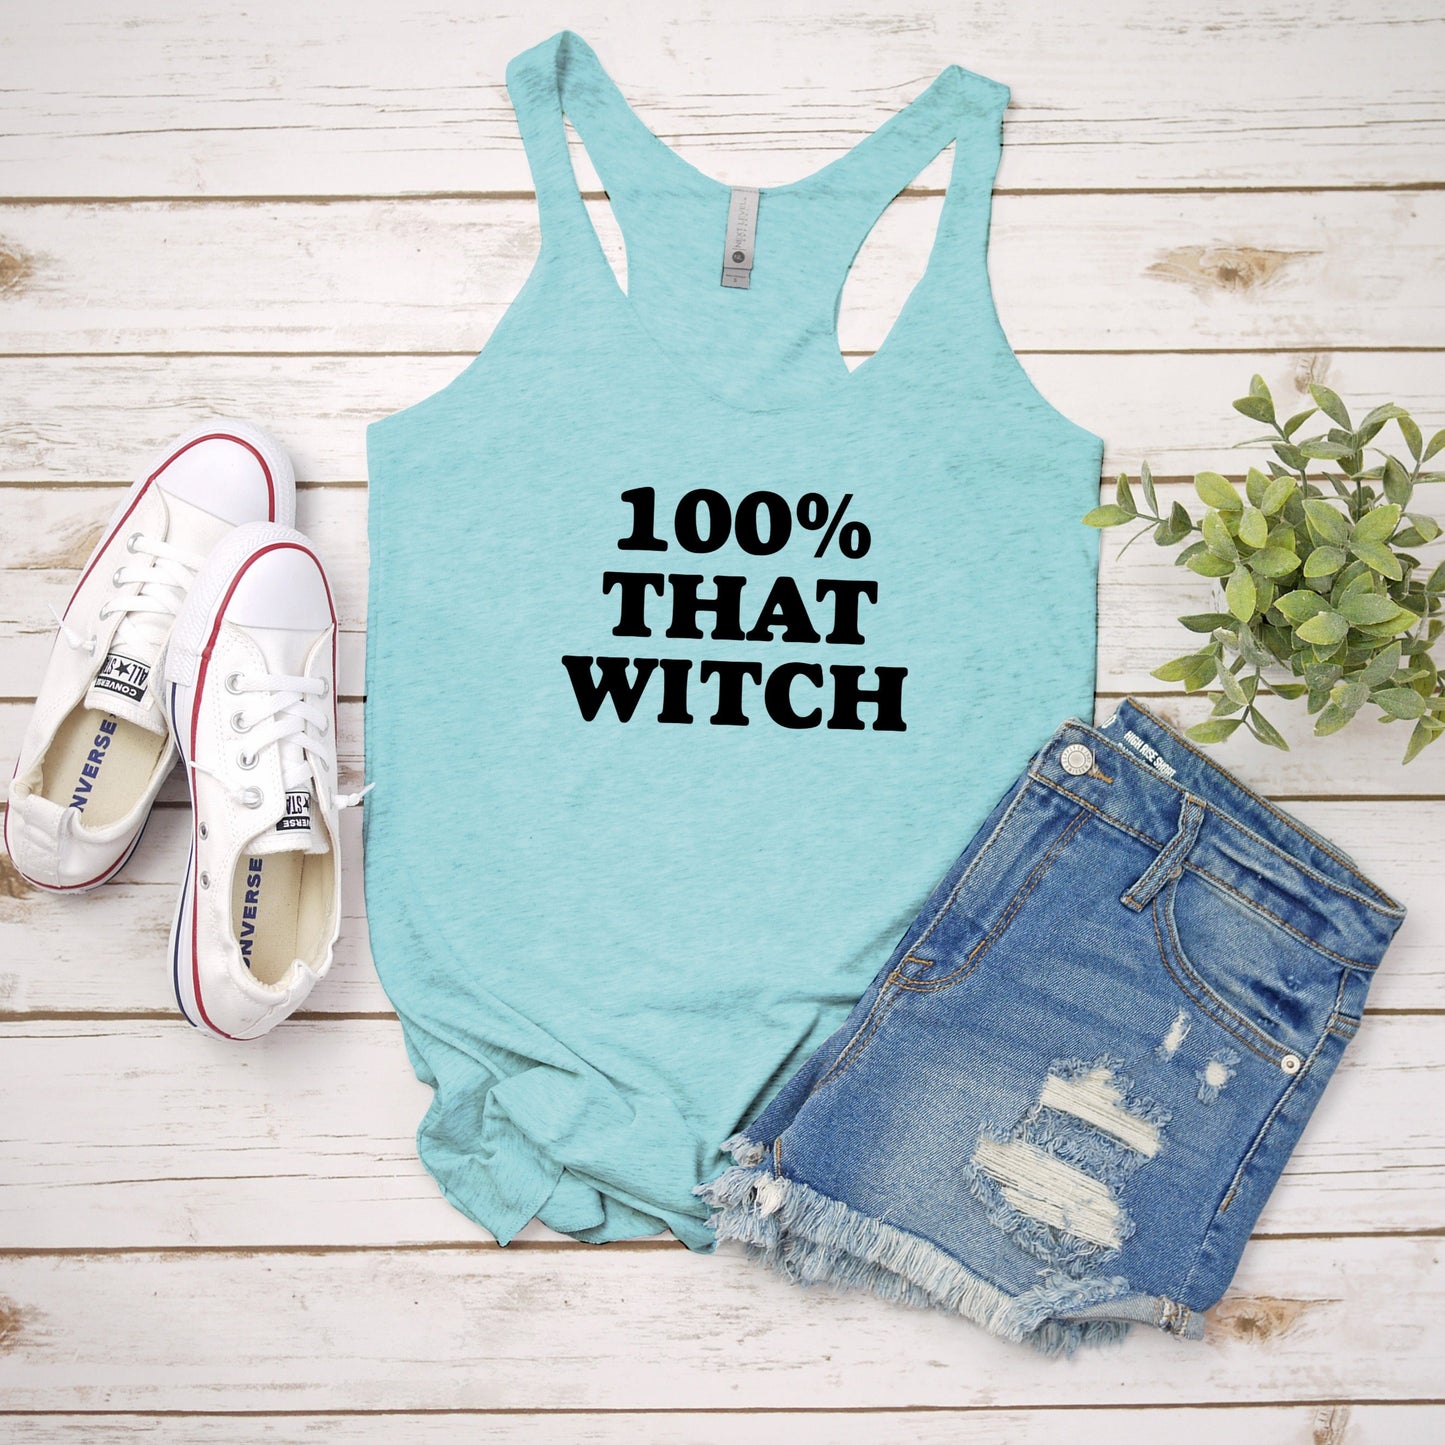 100% That Witch - Women's Tank - Heather Gray, Tahiti, or Envy